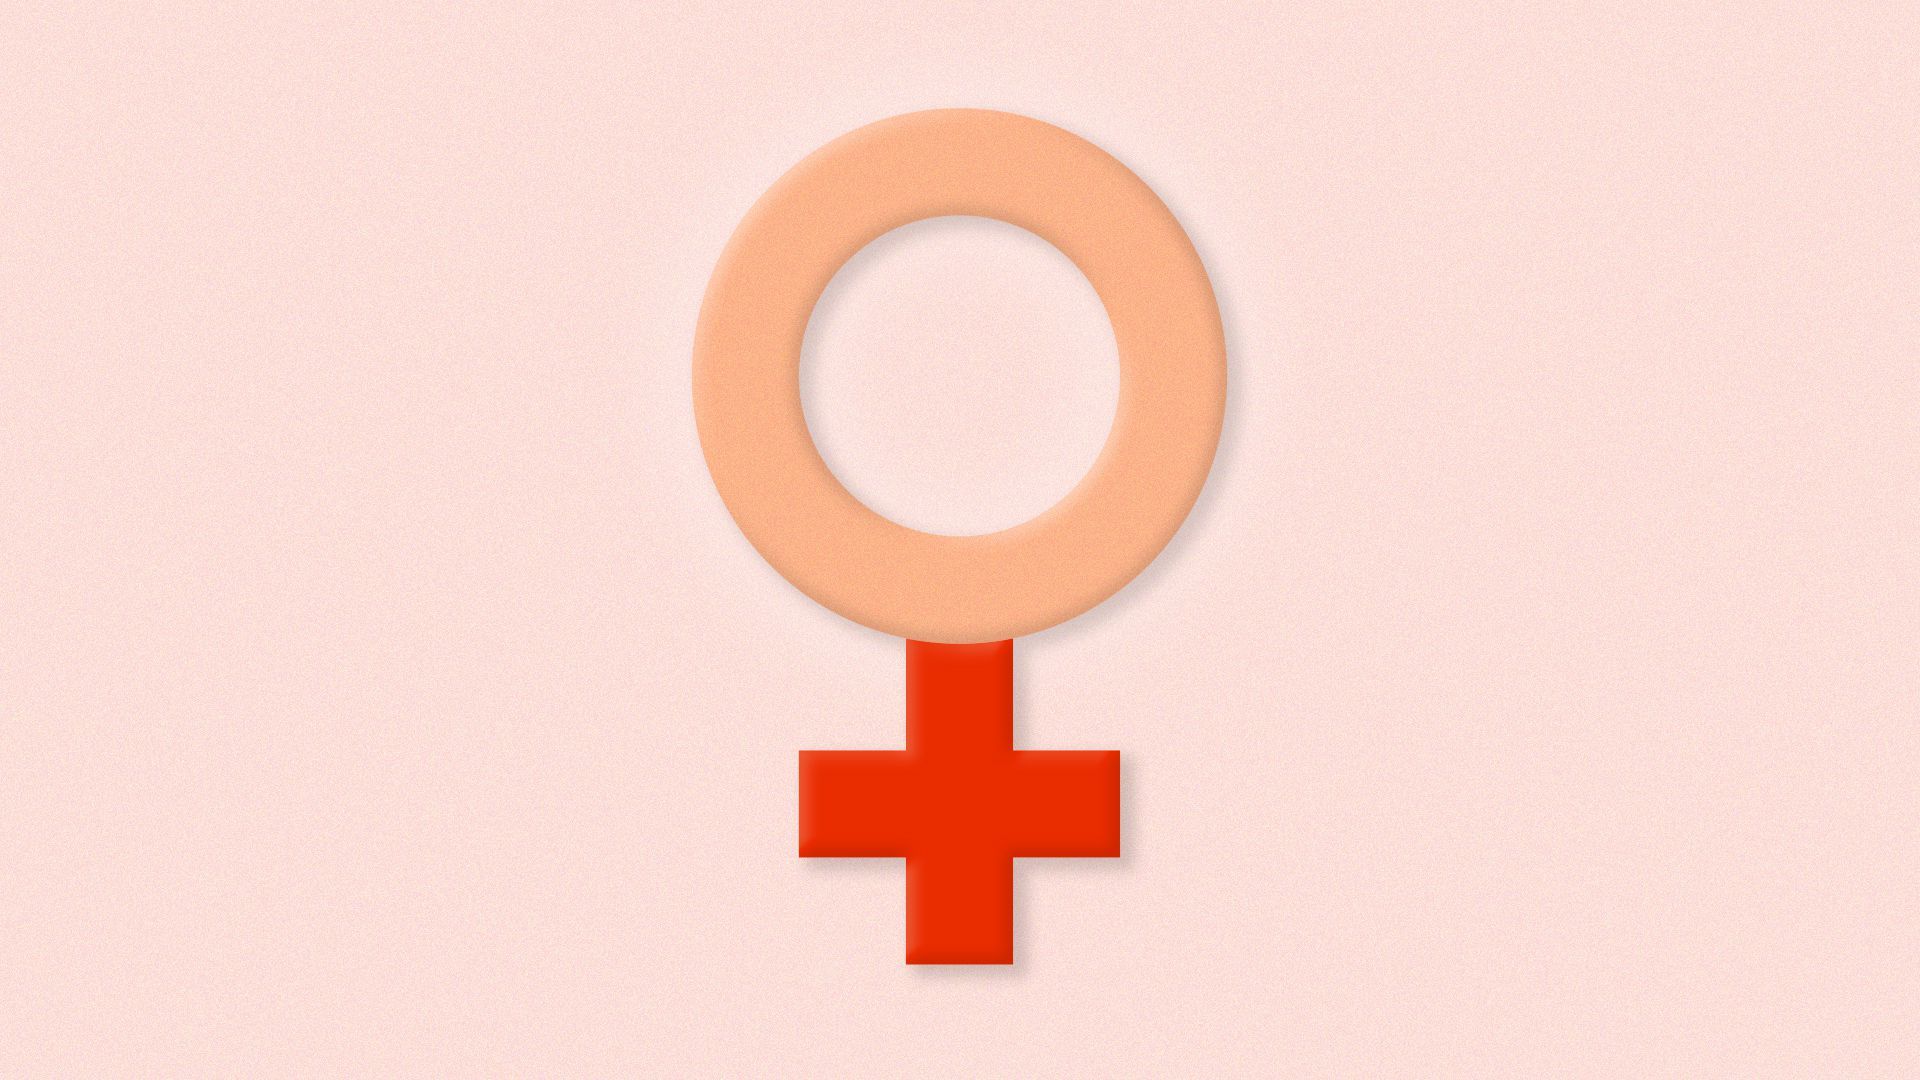 Illustration of a female symbol and a red cross merged together.